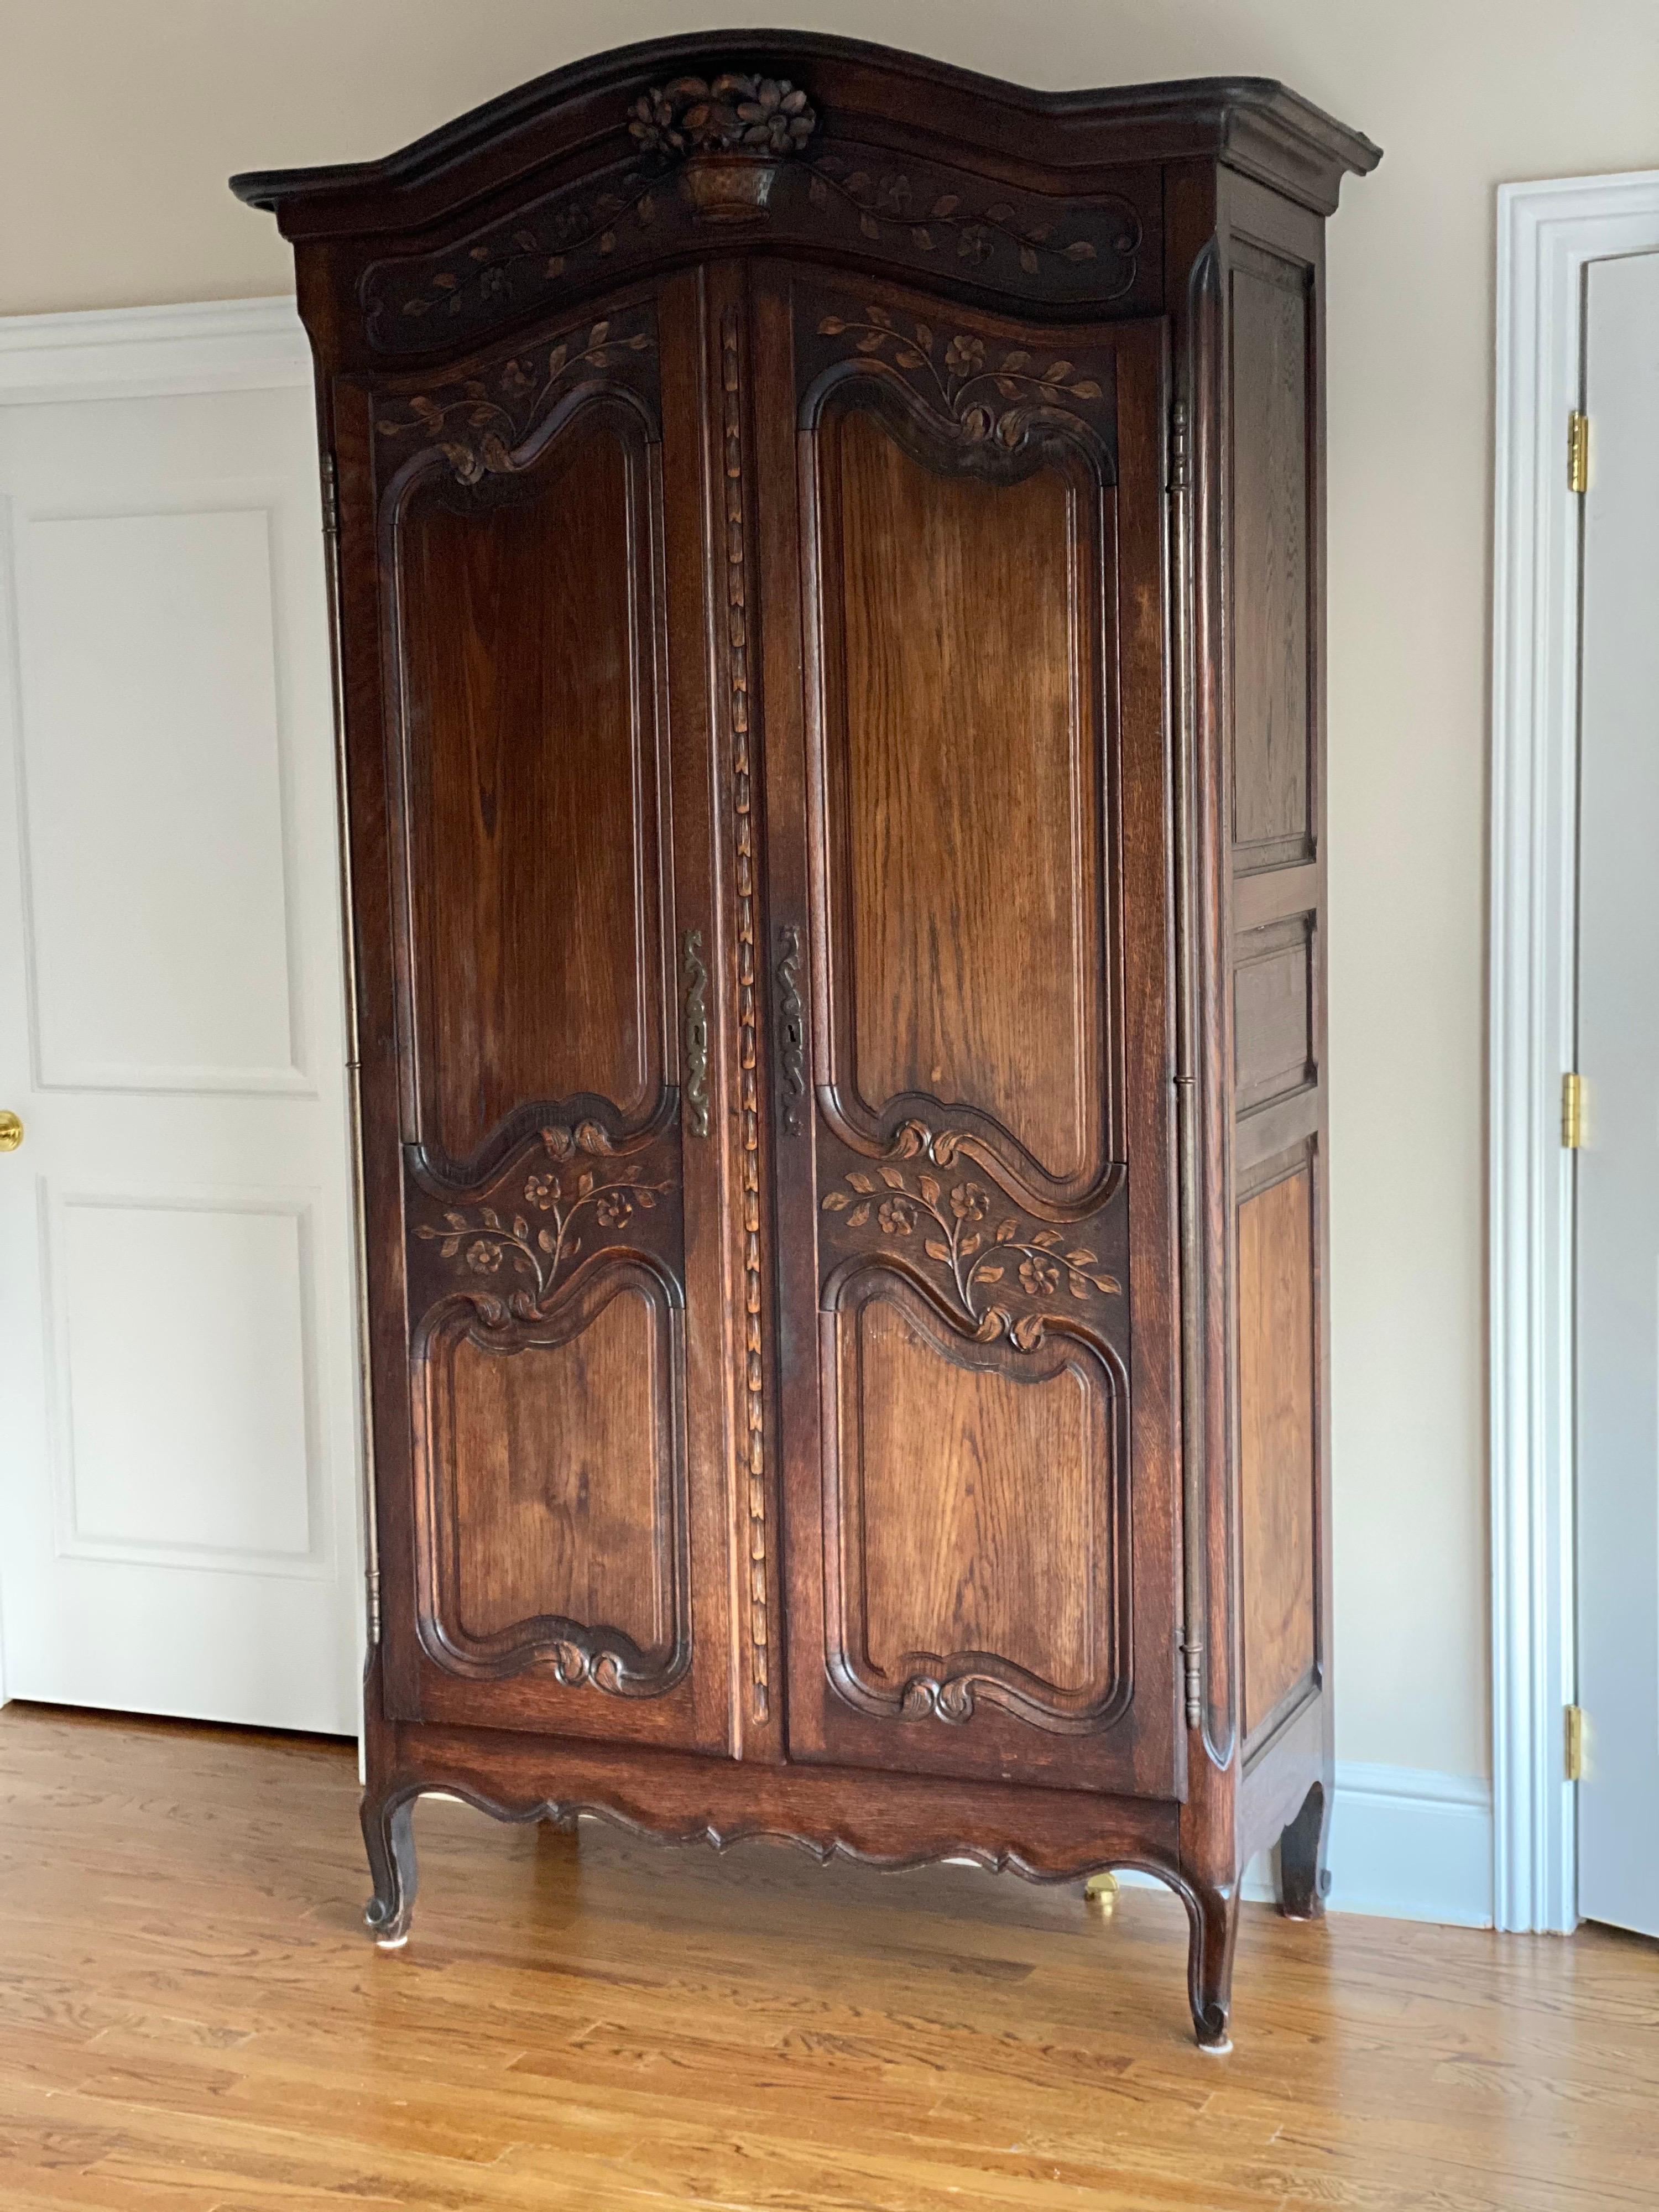 French Louis XV style walnut armoire
This armoire is more slender than the Classic Louis XV armoires. The carving is nicely done and a really lovely scale. Foliage, scrolling, and bouquet are nicely carved. Two doors open to four shelves (some